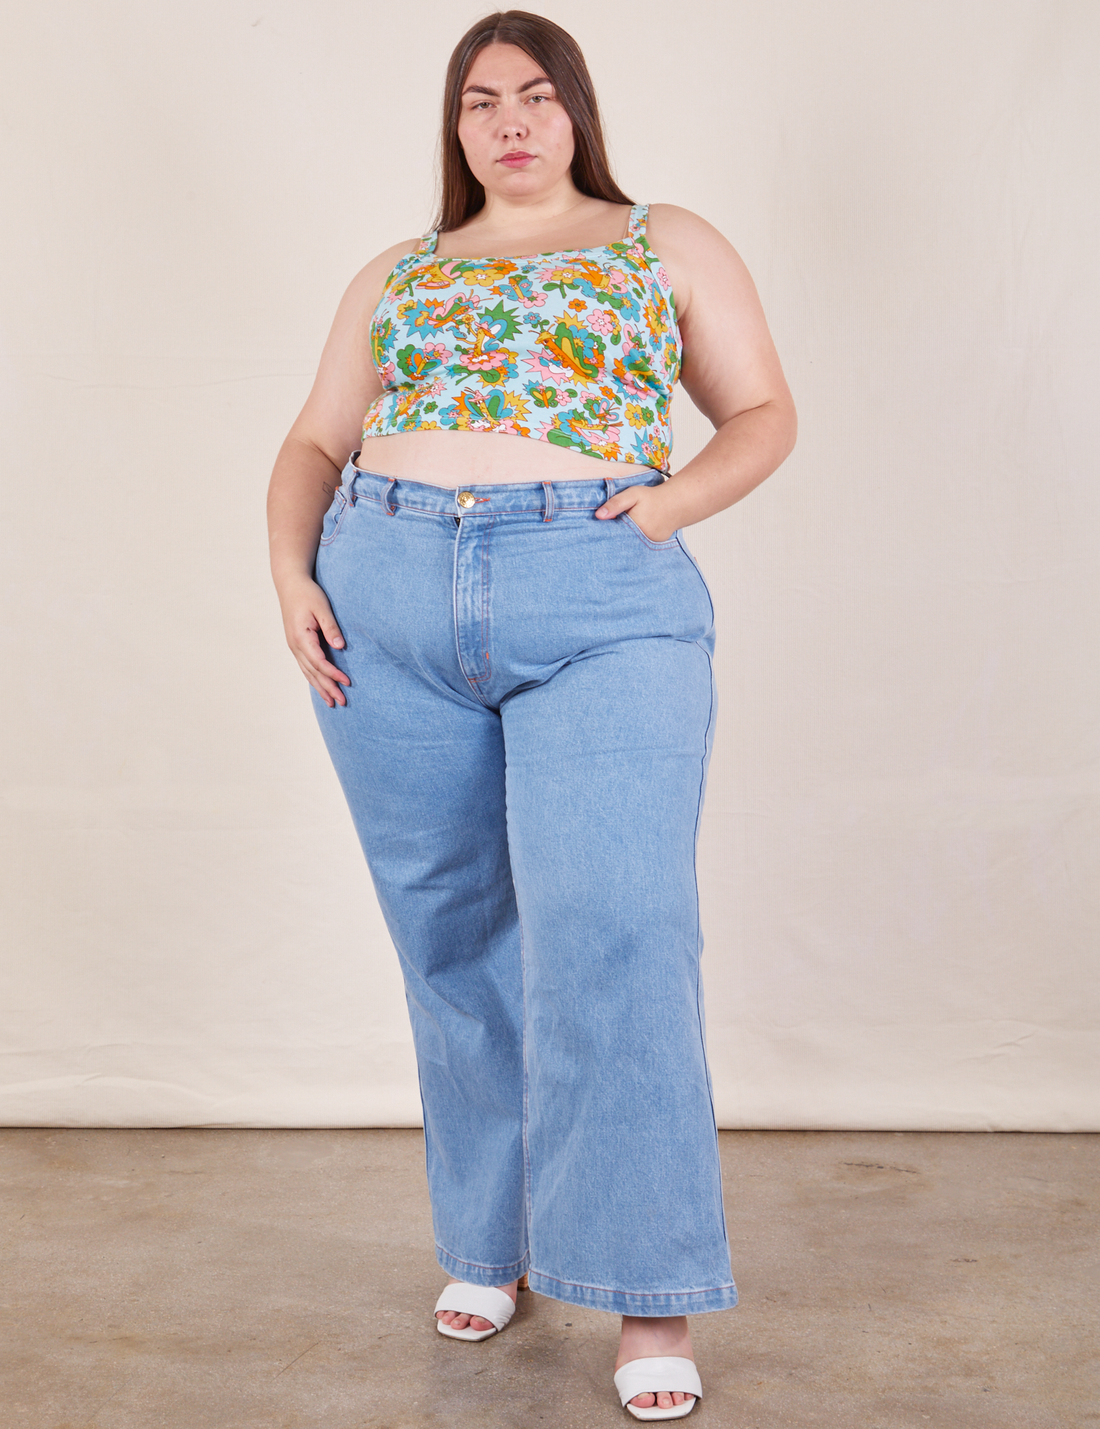 Marielena is wearing Butterfly Bash Cami and light wash Sailor Jeans